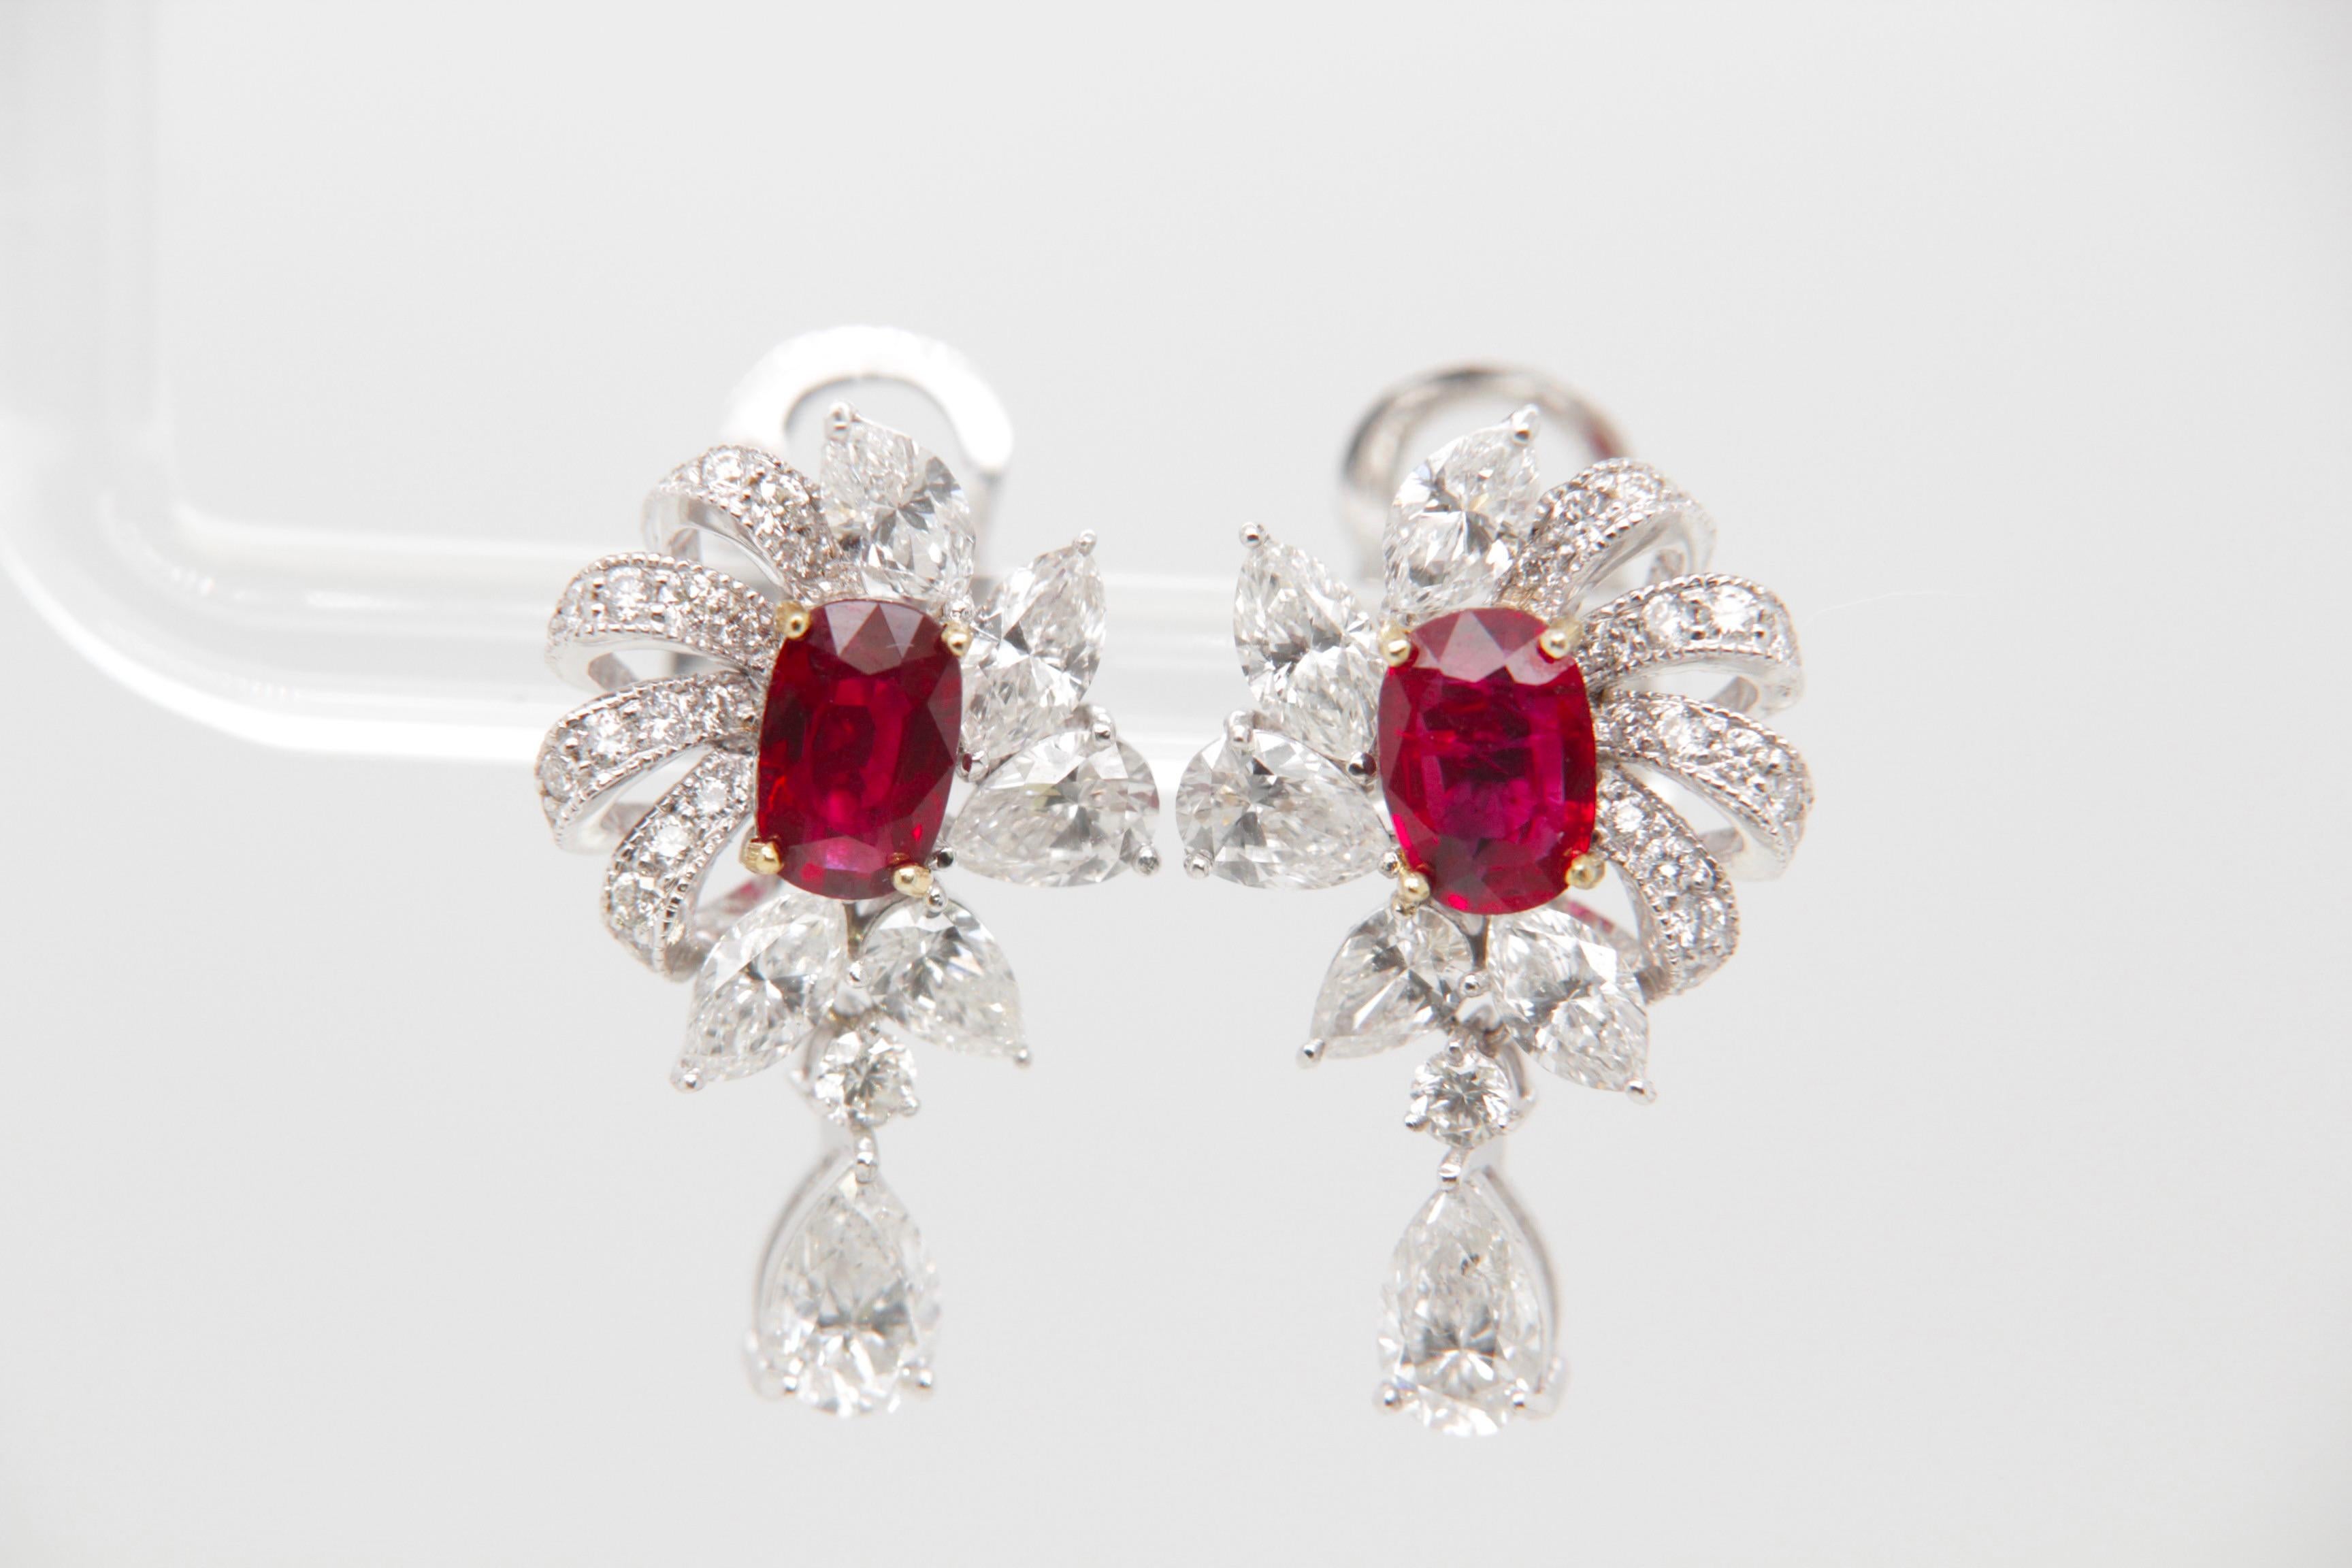 Introducing a timeless creation from Rewa Jewelry, these ruby and diamond earrings are a harmonious blend of classic inspiration and contemporary elegance—an exquisite masterpiece that showcases the brand's dedication to superior craftsmanship and